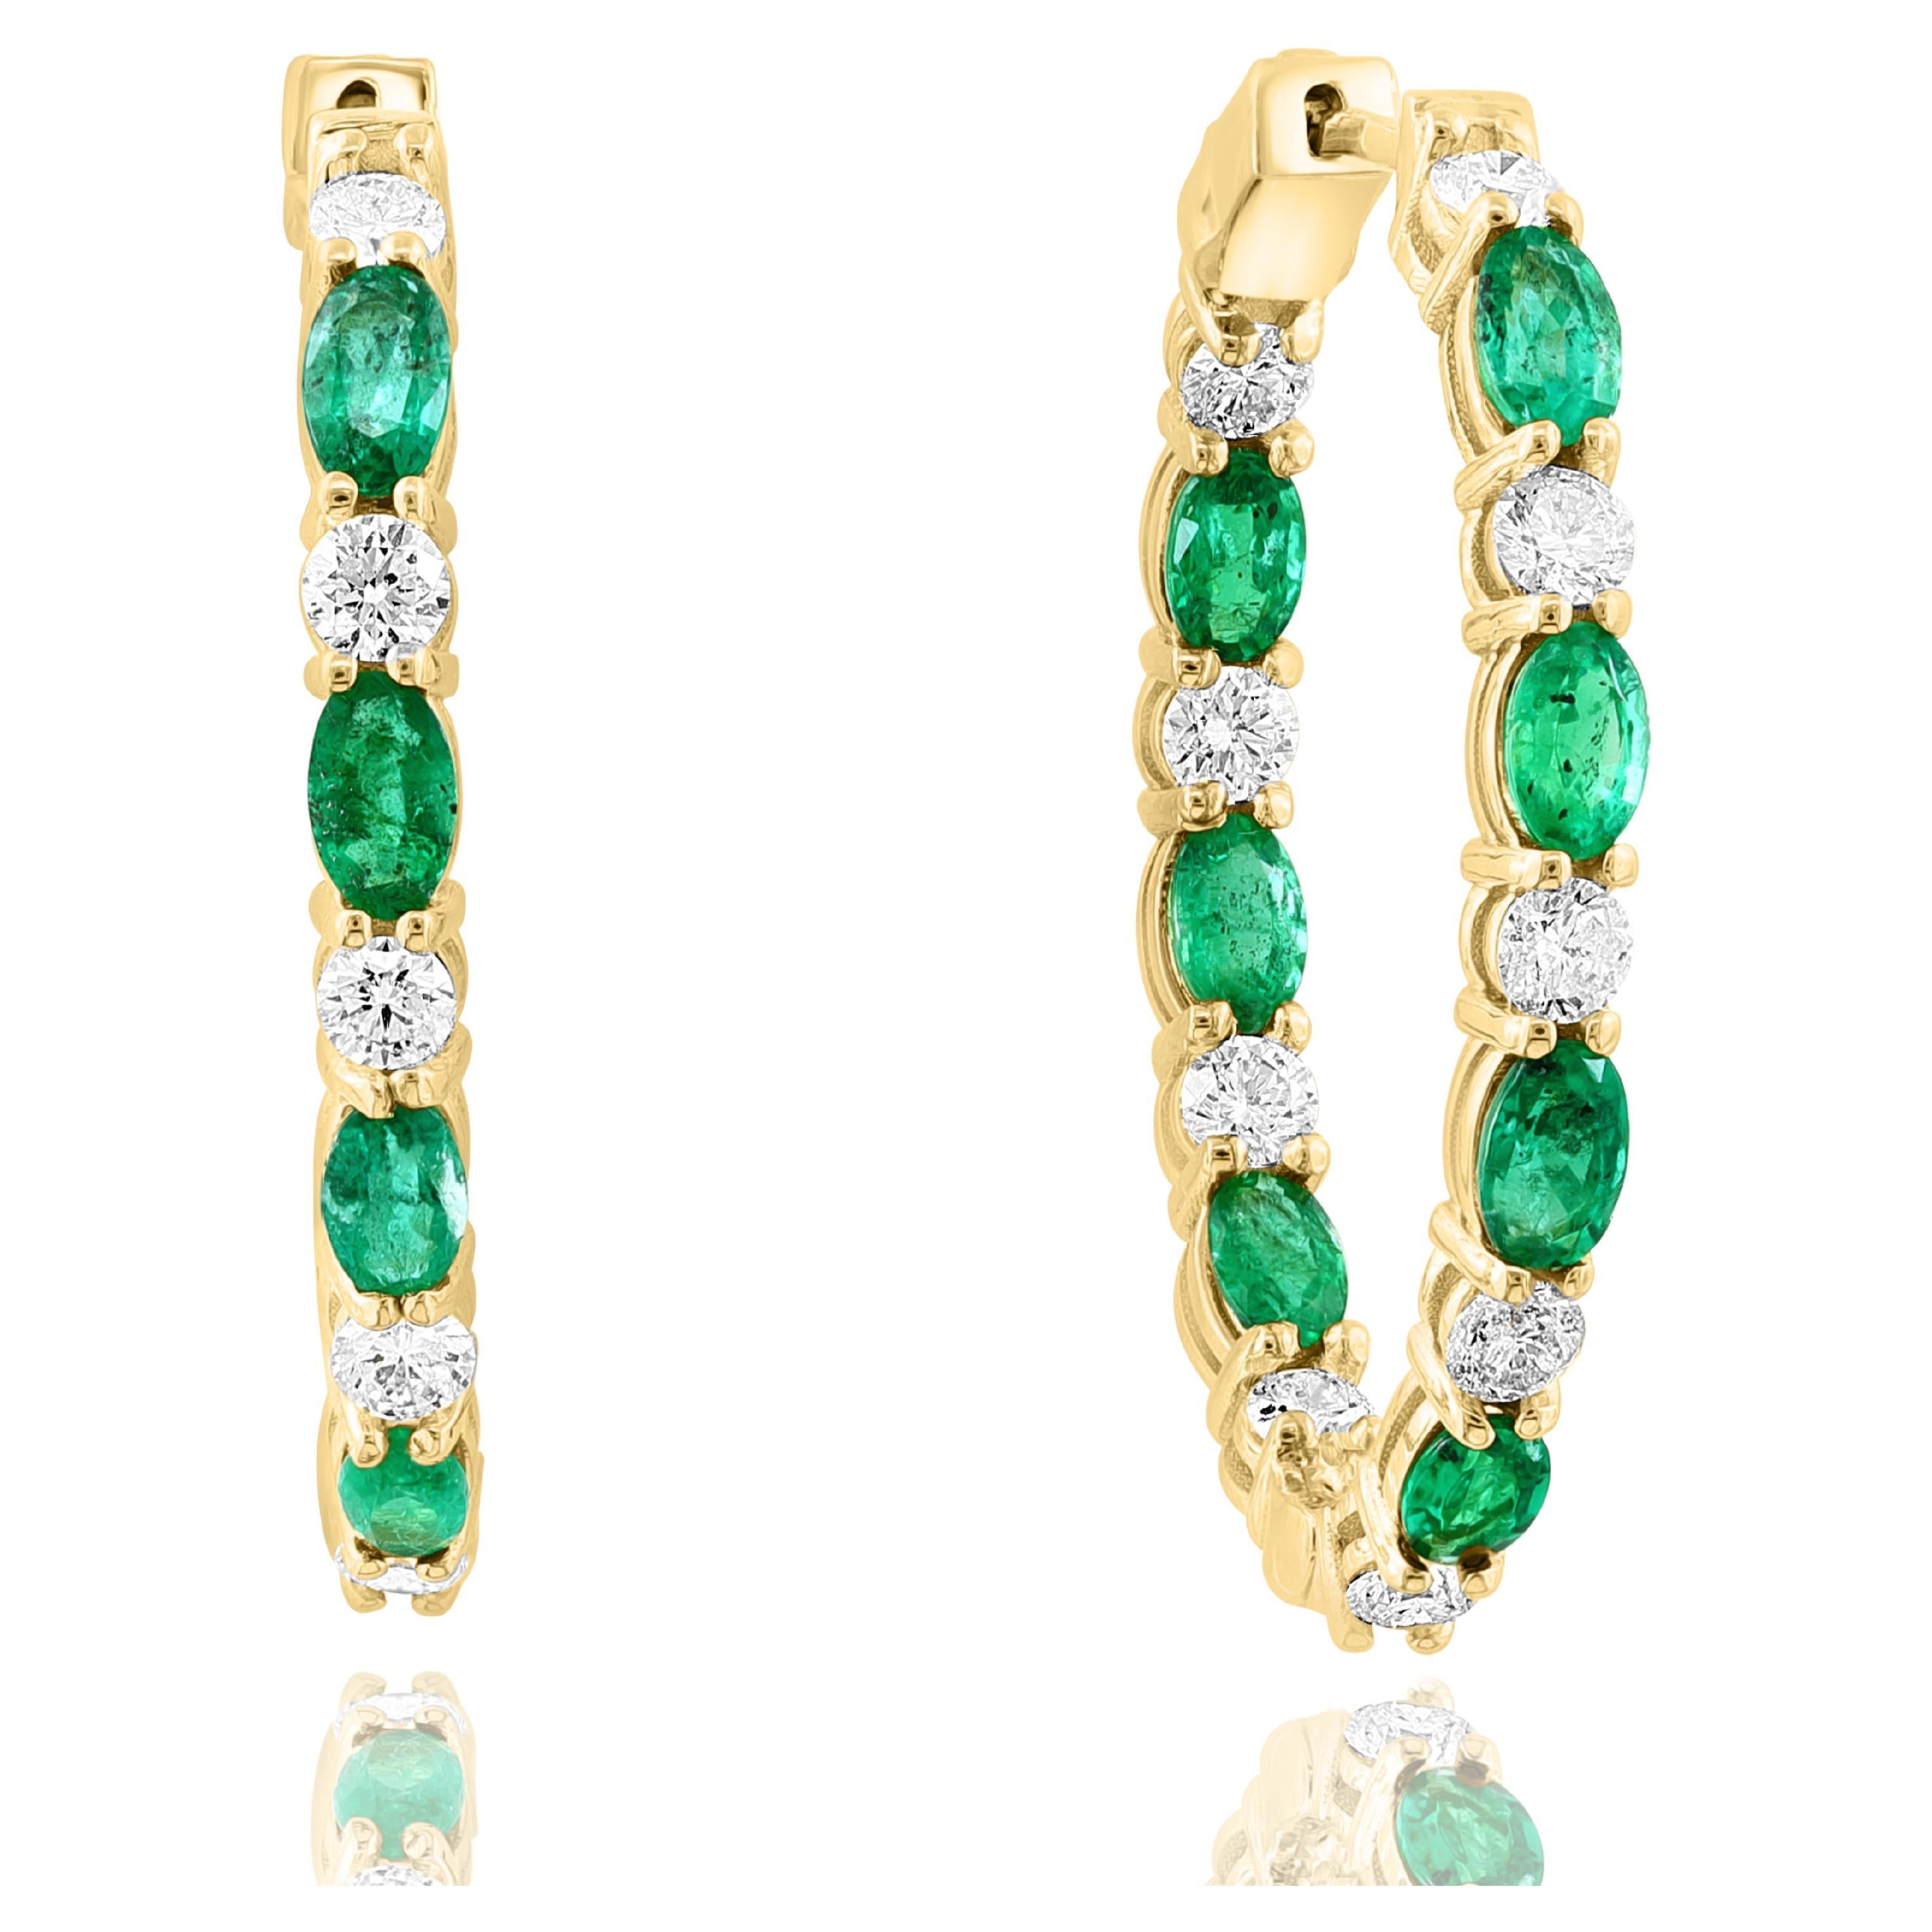 3.13 Carat Oval Cut Emerald and Diamond Hoop Earrings in 14K Yellow Gold For Sale